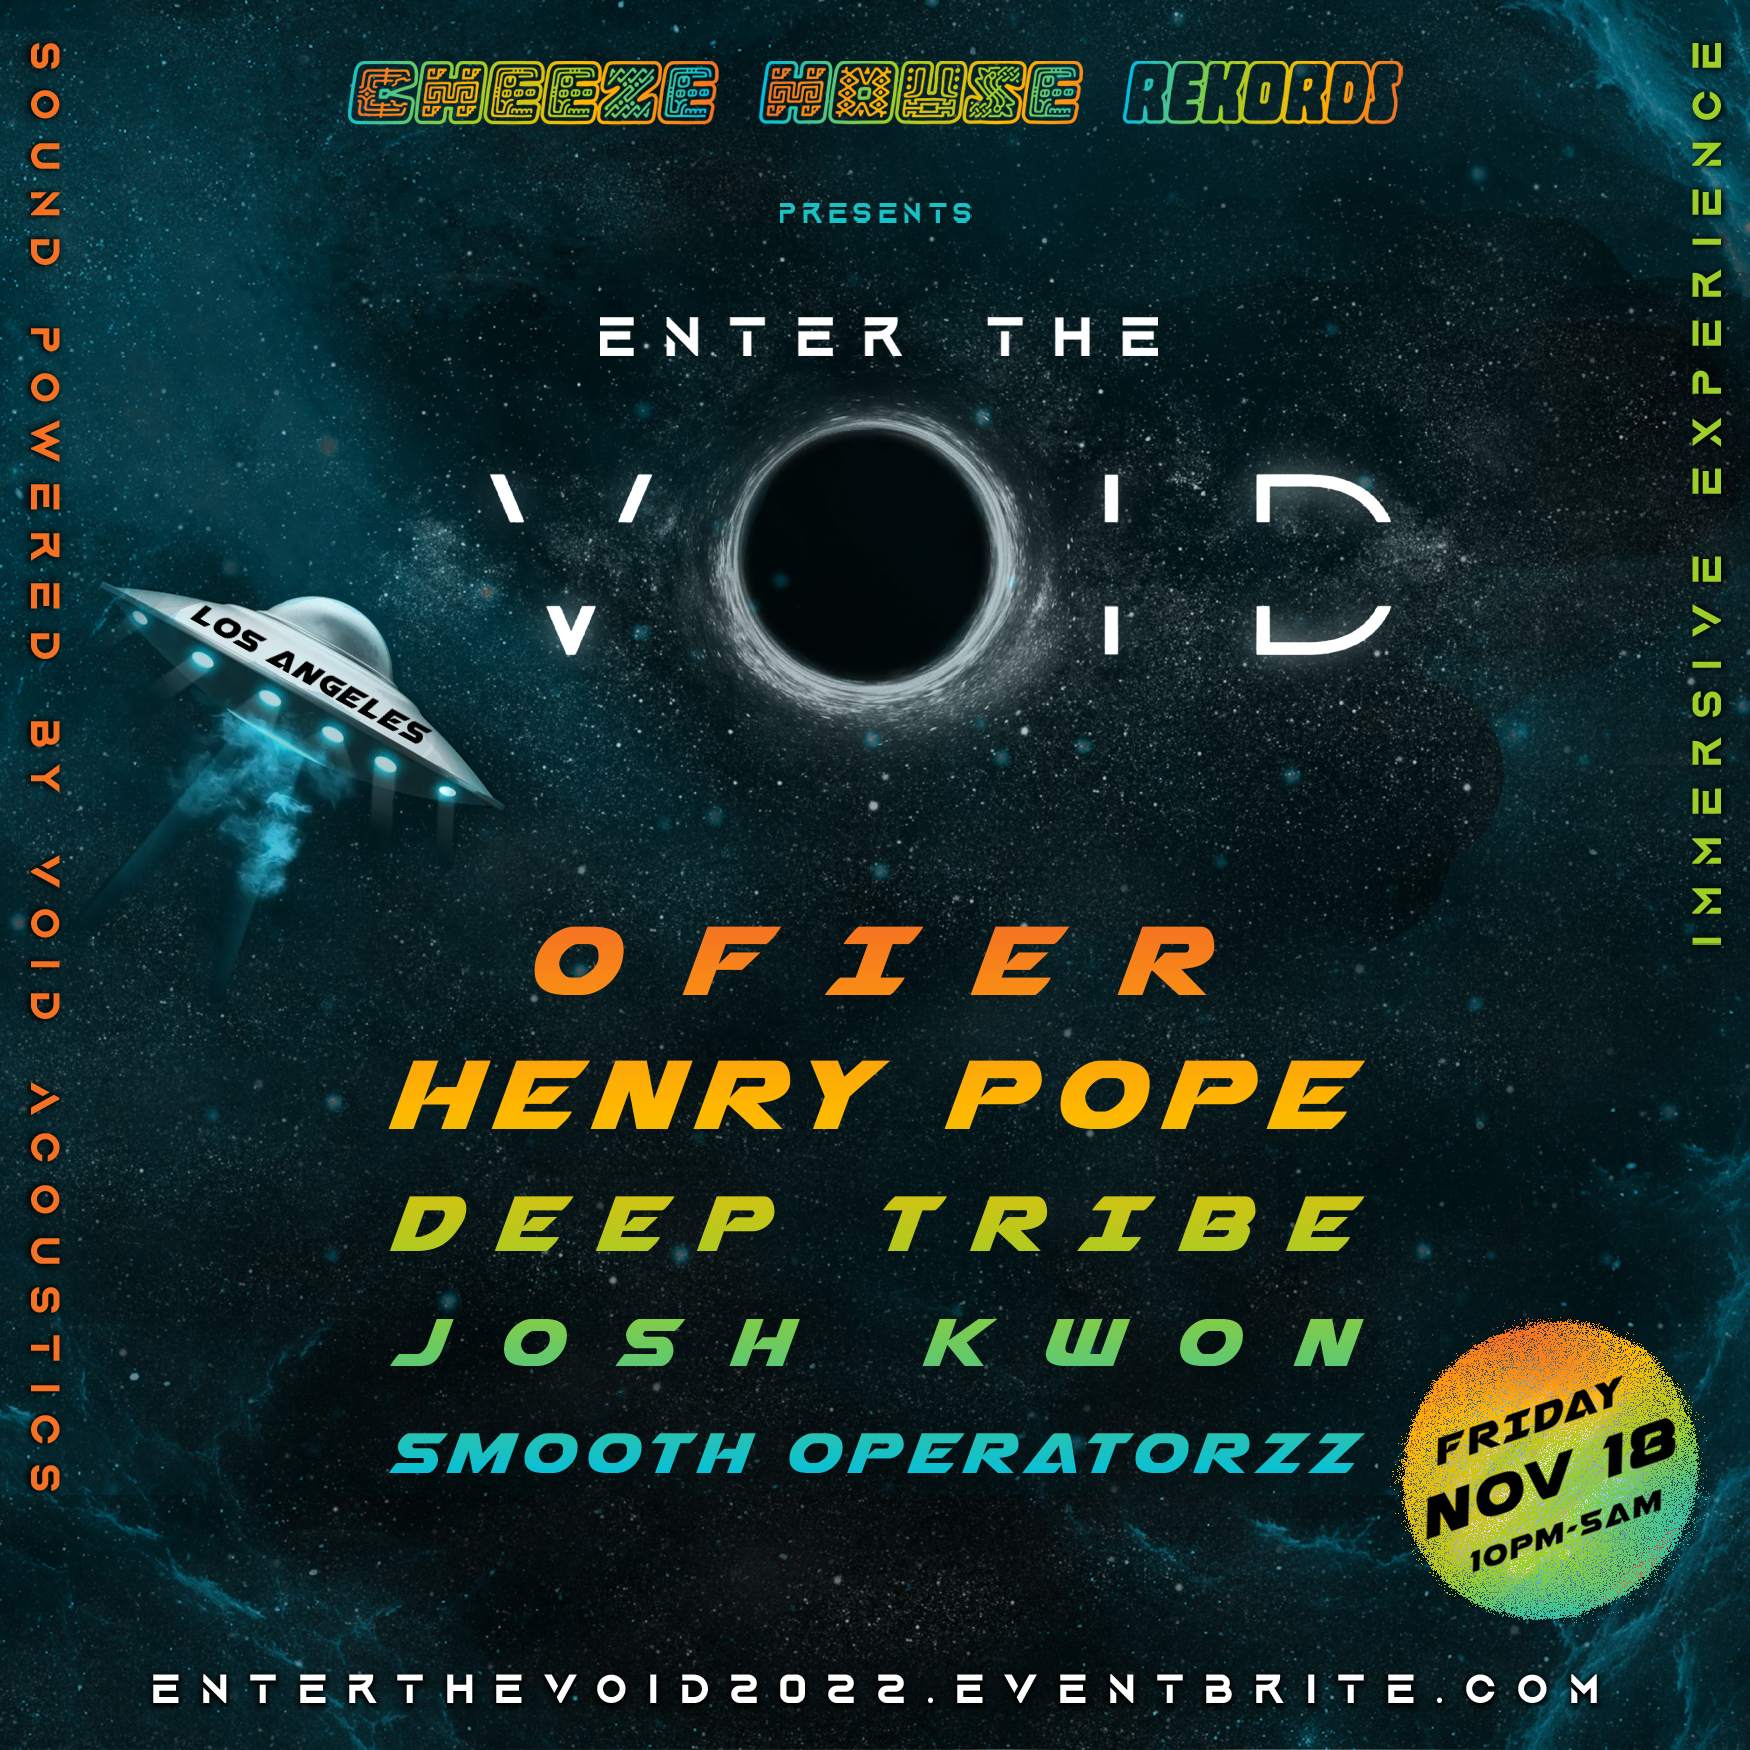 Enter the Void: Ofier, Henry Pope, Deep Tribe, Josh Kwon, Smooth Operatorzz - Página frontal